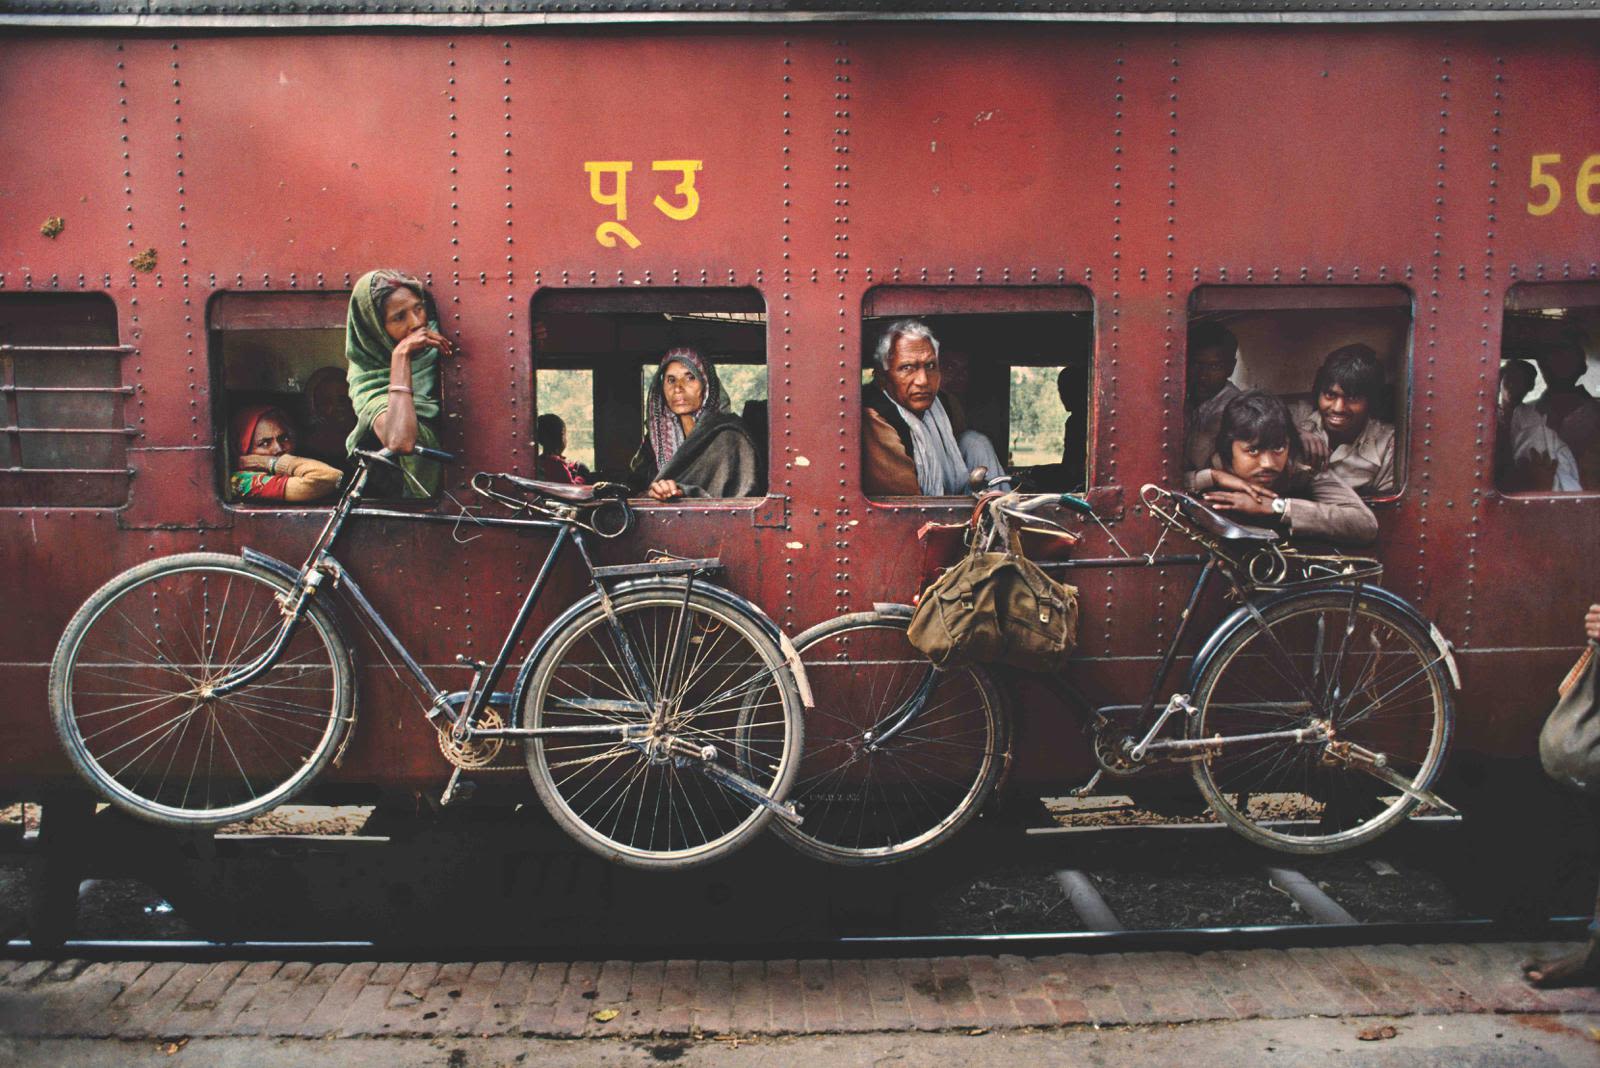 West Bengal, India, 1983. Photo by Steve McCurry.